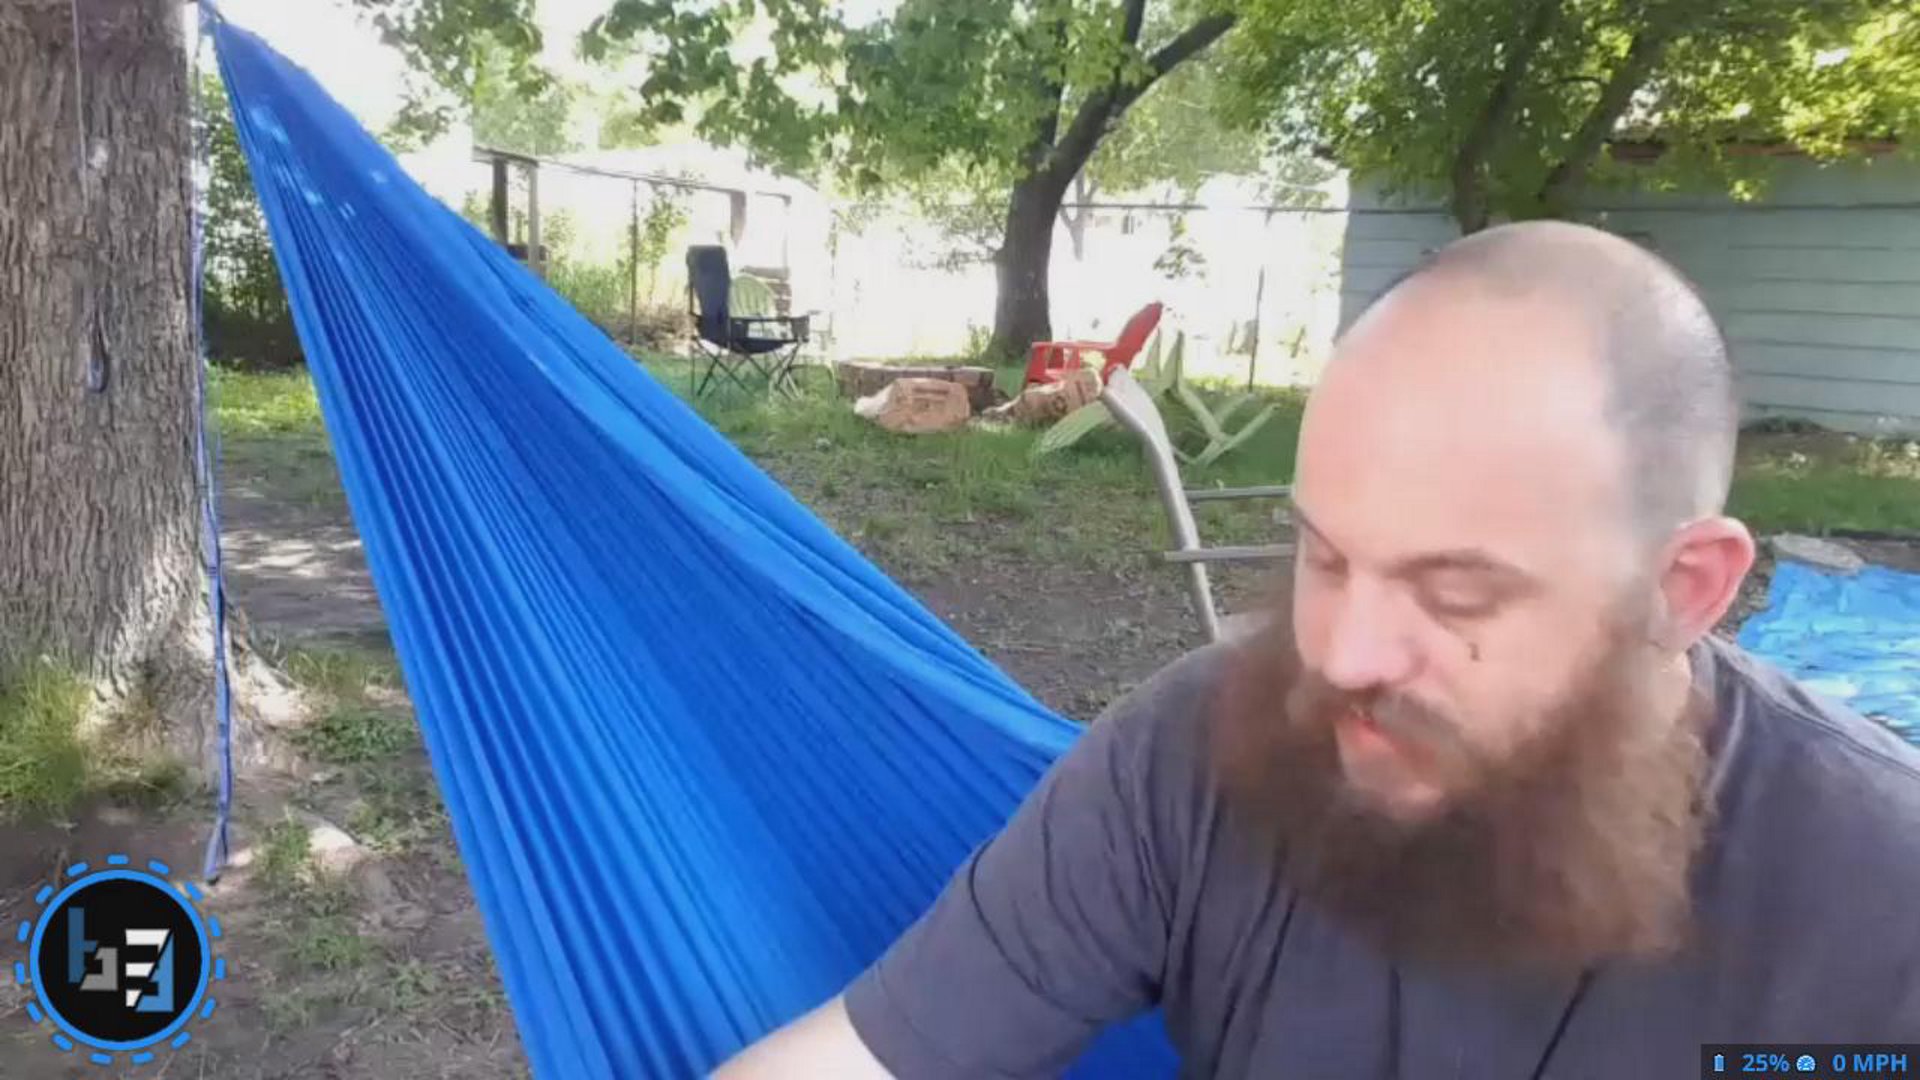 hammock-time-discord-bttv-sub-donate-luv-travel-outdoors-0902-https-t-co-0hauyvoqck-https-t-co-h20w5rvfrf